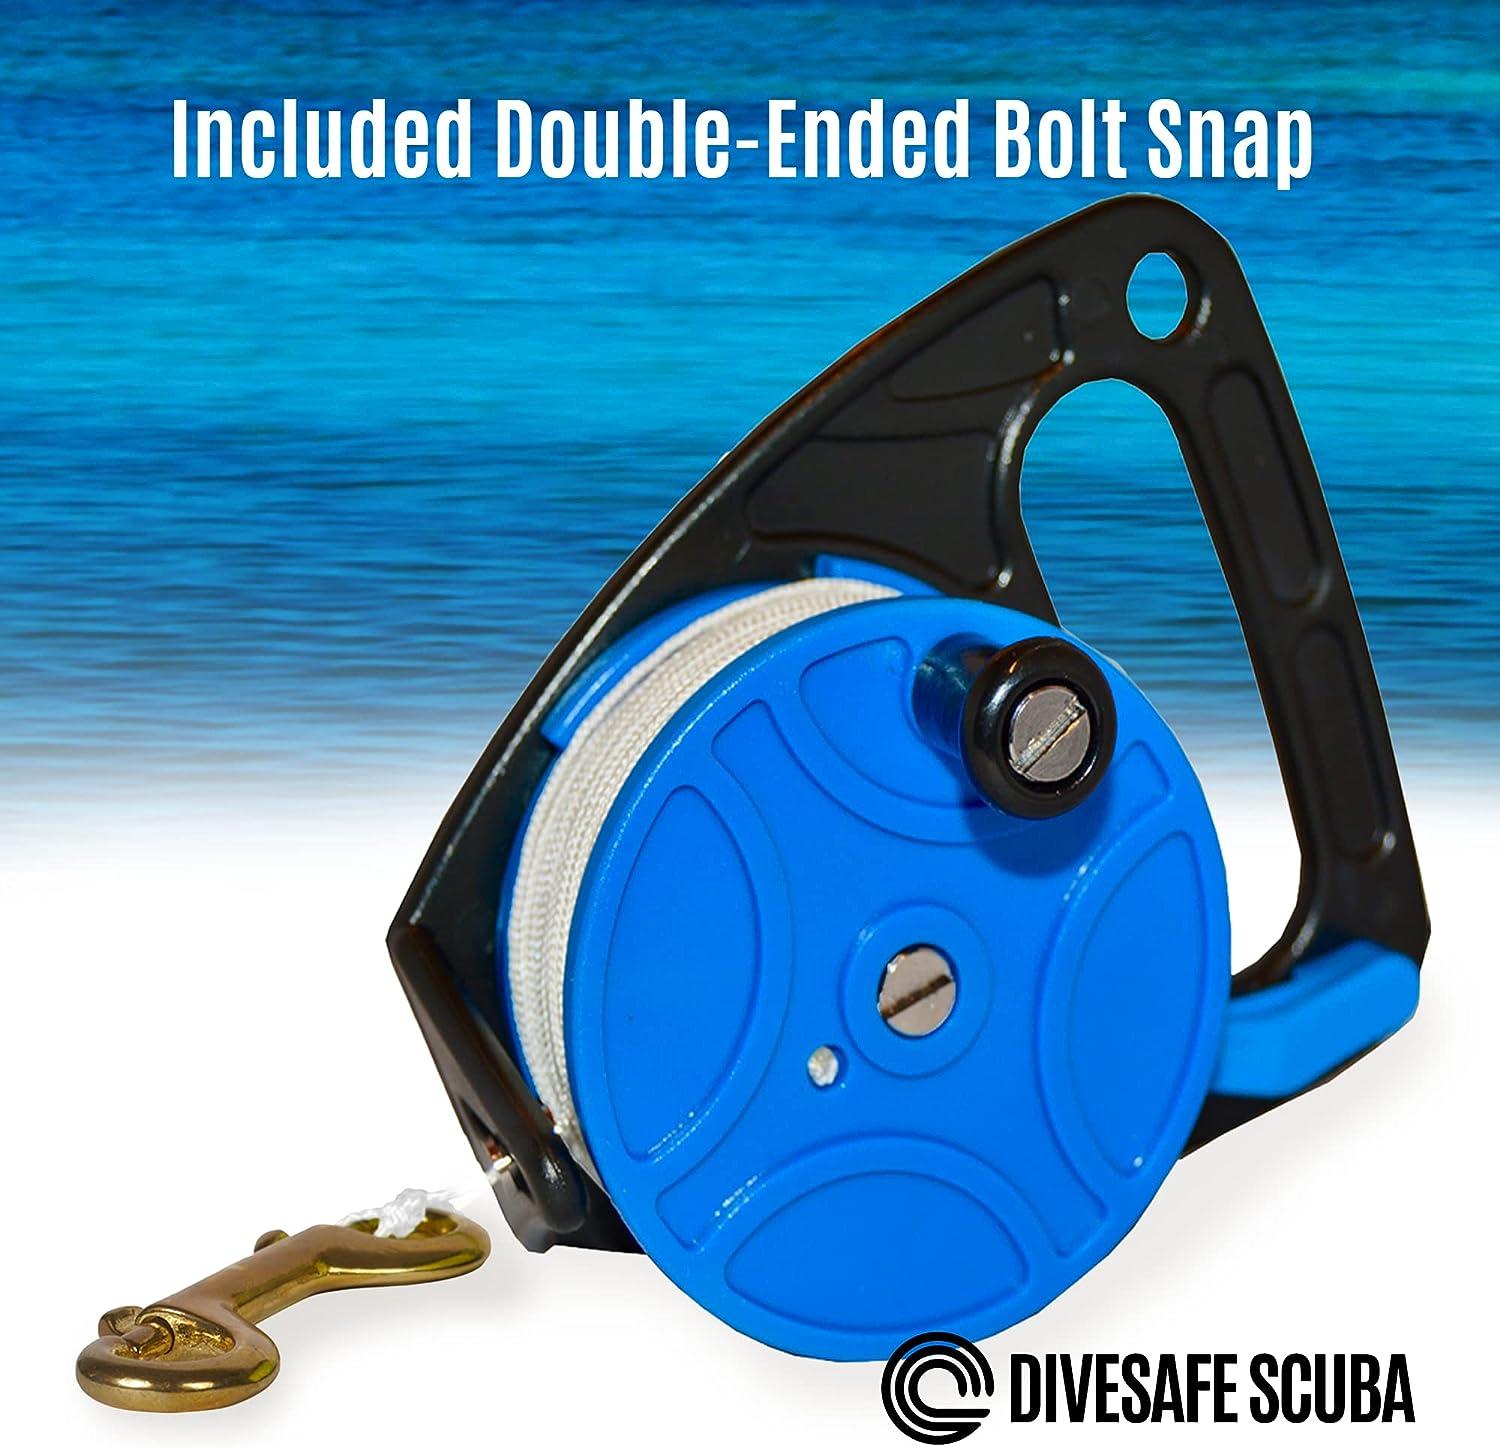 DiveSafe Scuba Diving Reel with Thumb Stopper and High Visibility